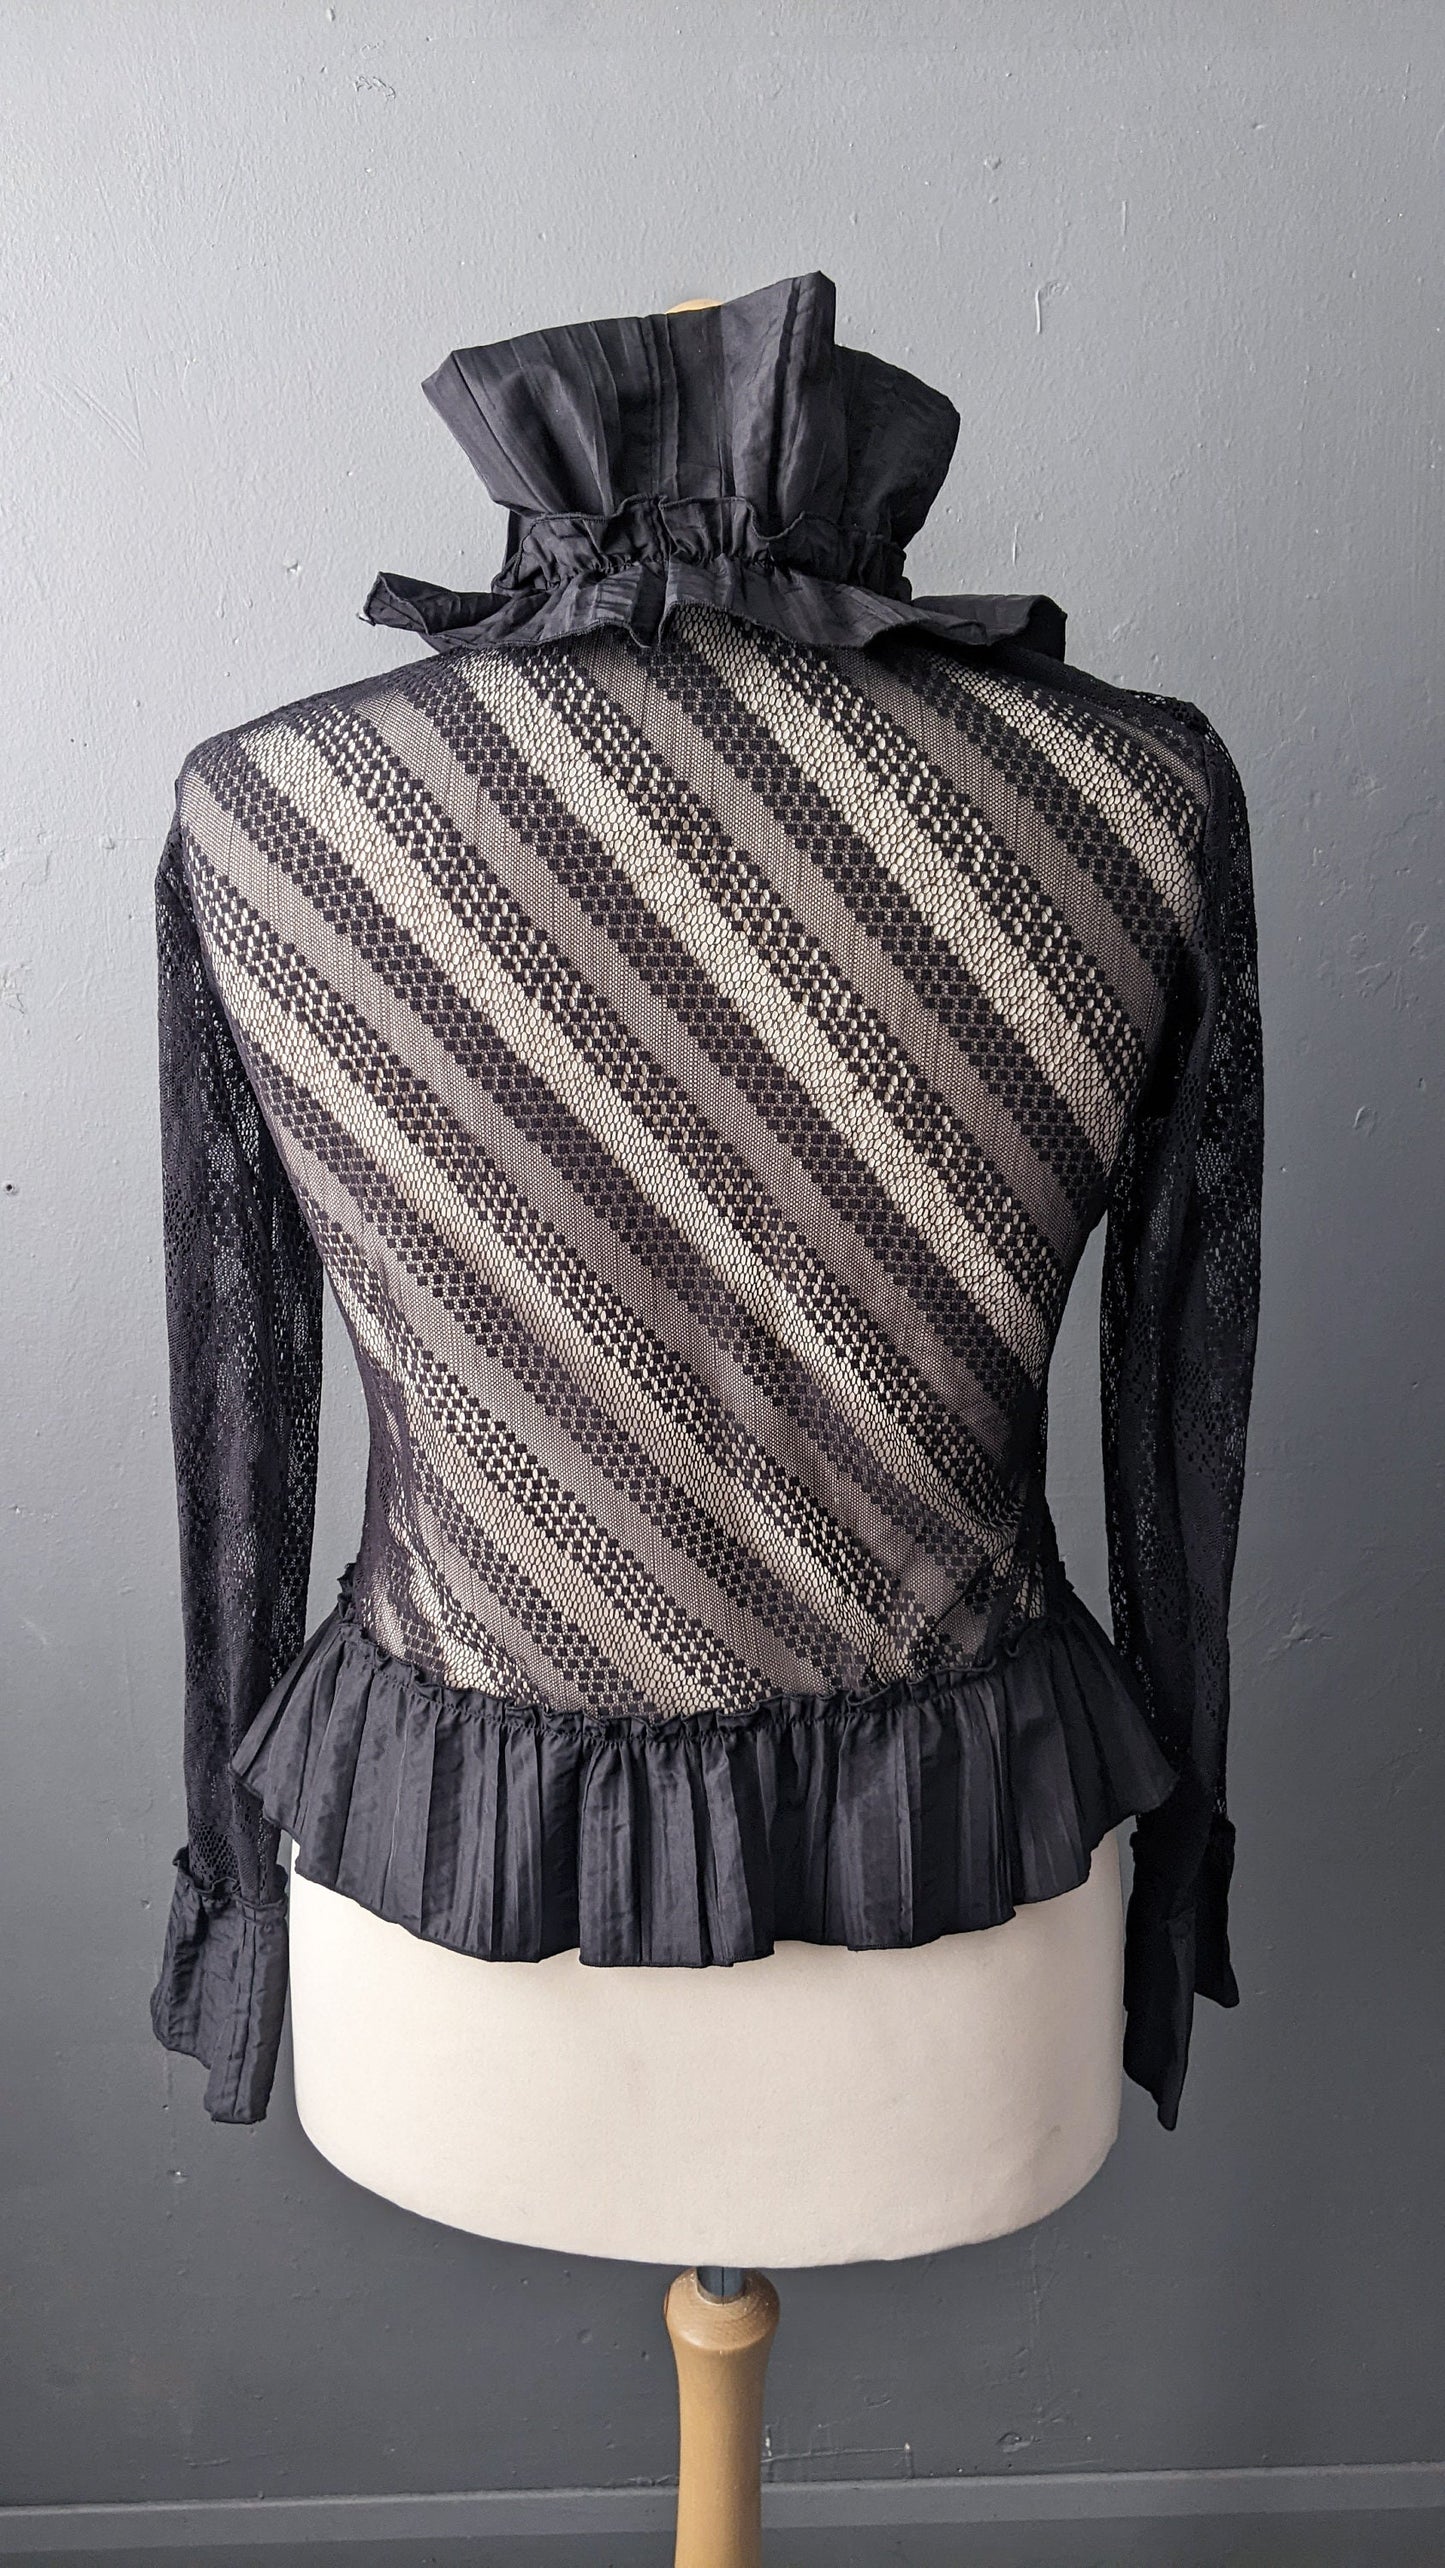 90s Gothic Black Lace Top with Extravagant Ruffles, Size Medium Large